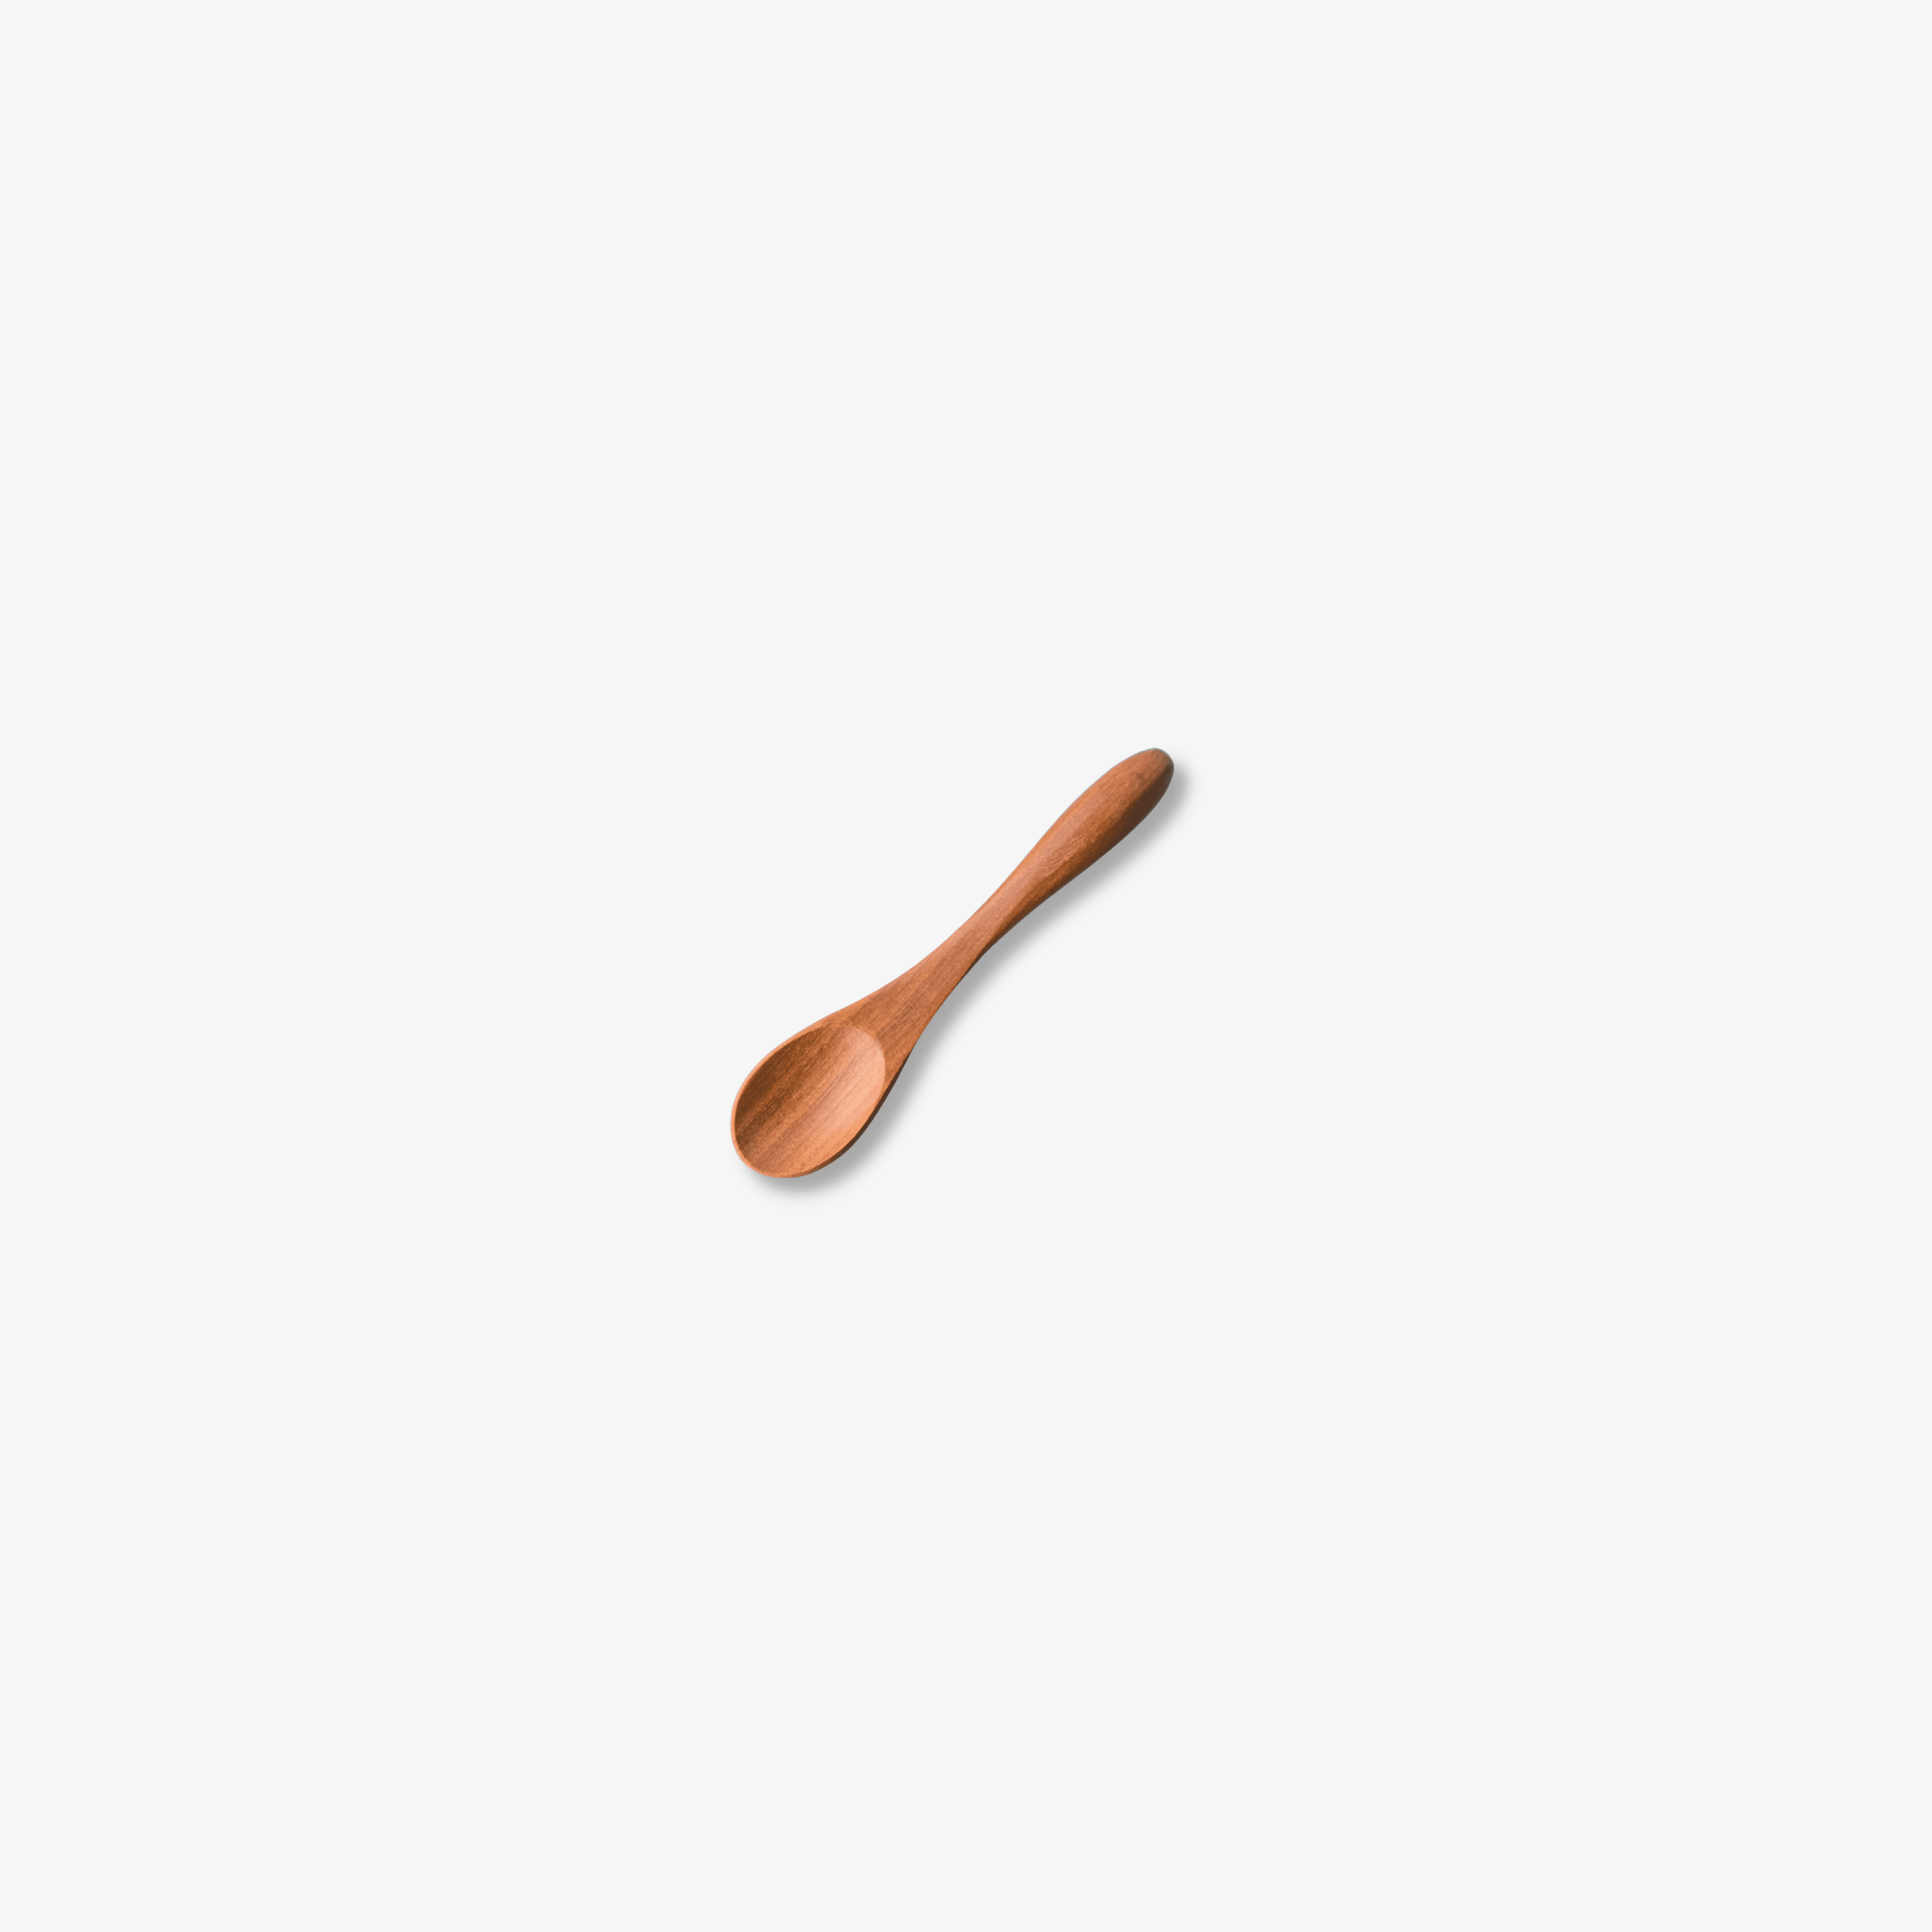 Short Wooden Spoon With Bag